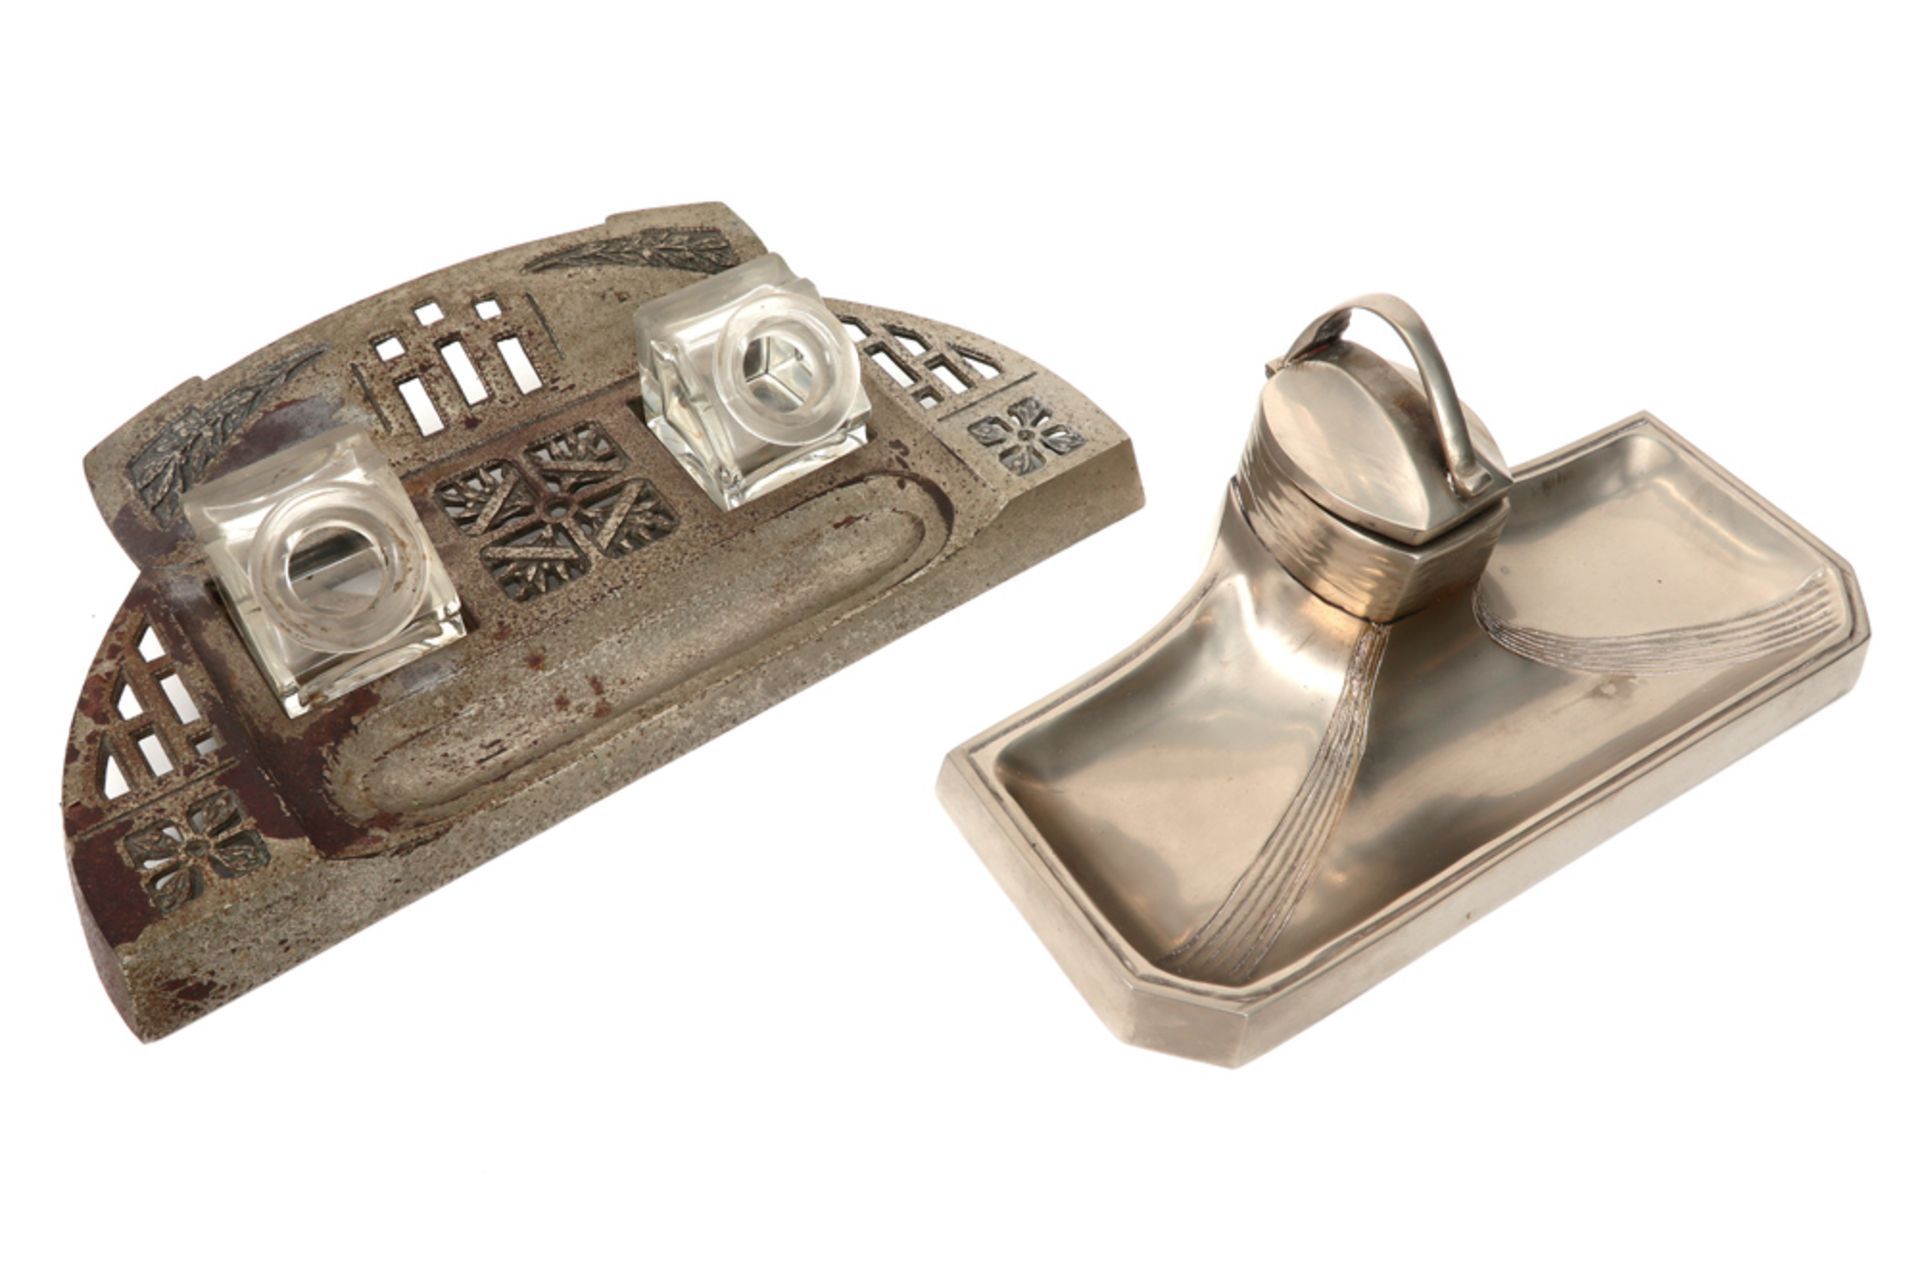 two Jugendstil inkstands, one with two glass inkwells